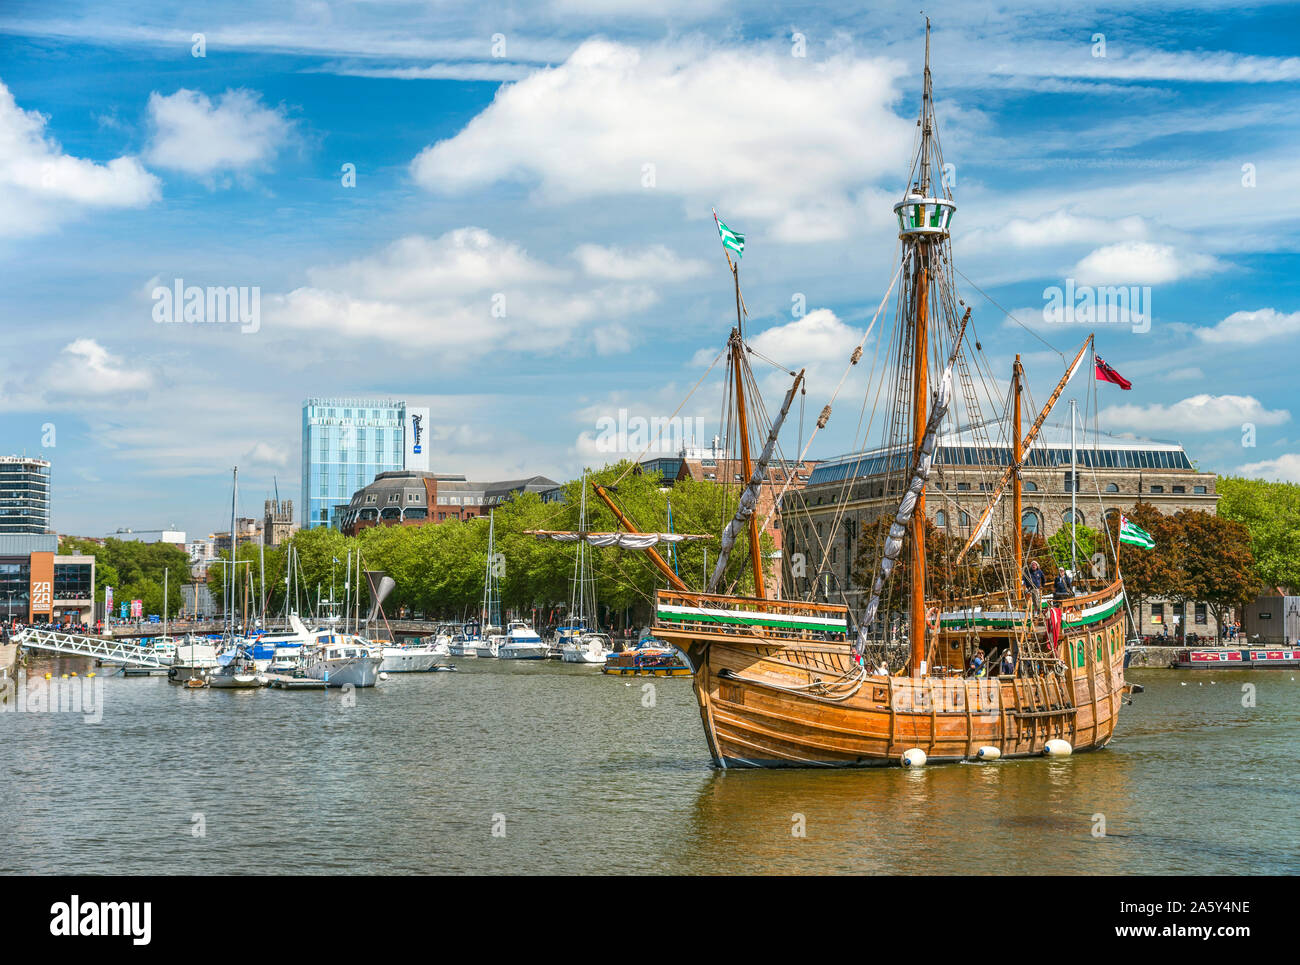 The Matthew, a replica ship that John Cabot and his crew used sailing to Newfoundland in 1497, Bristol, Somerset, England Stock Photo